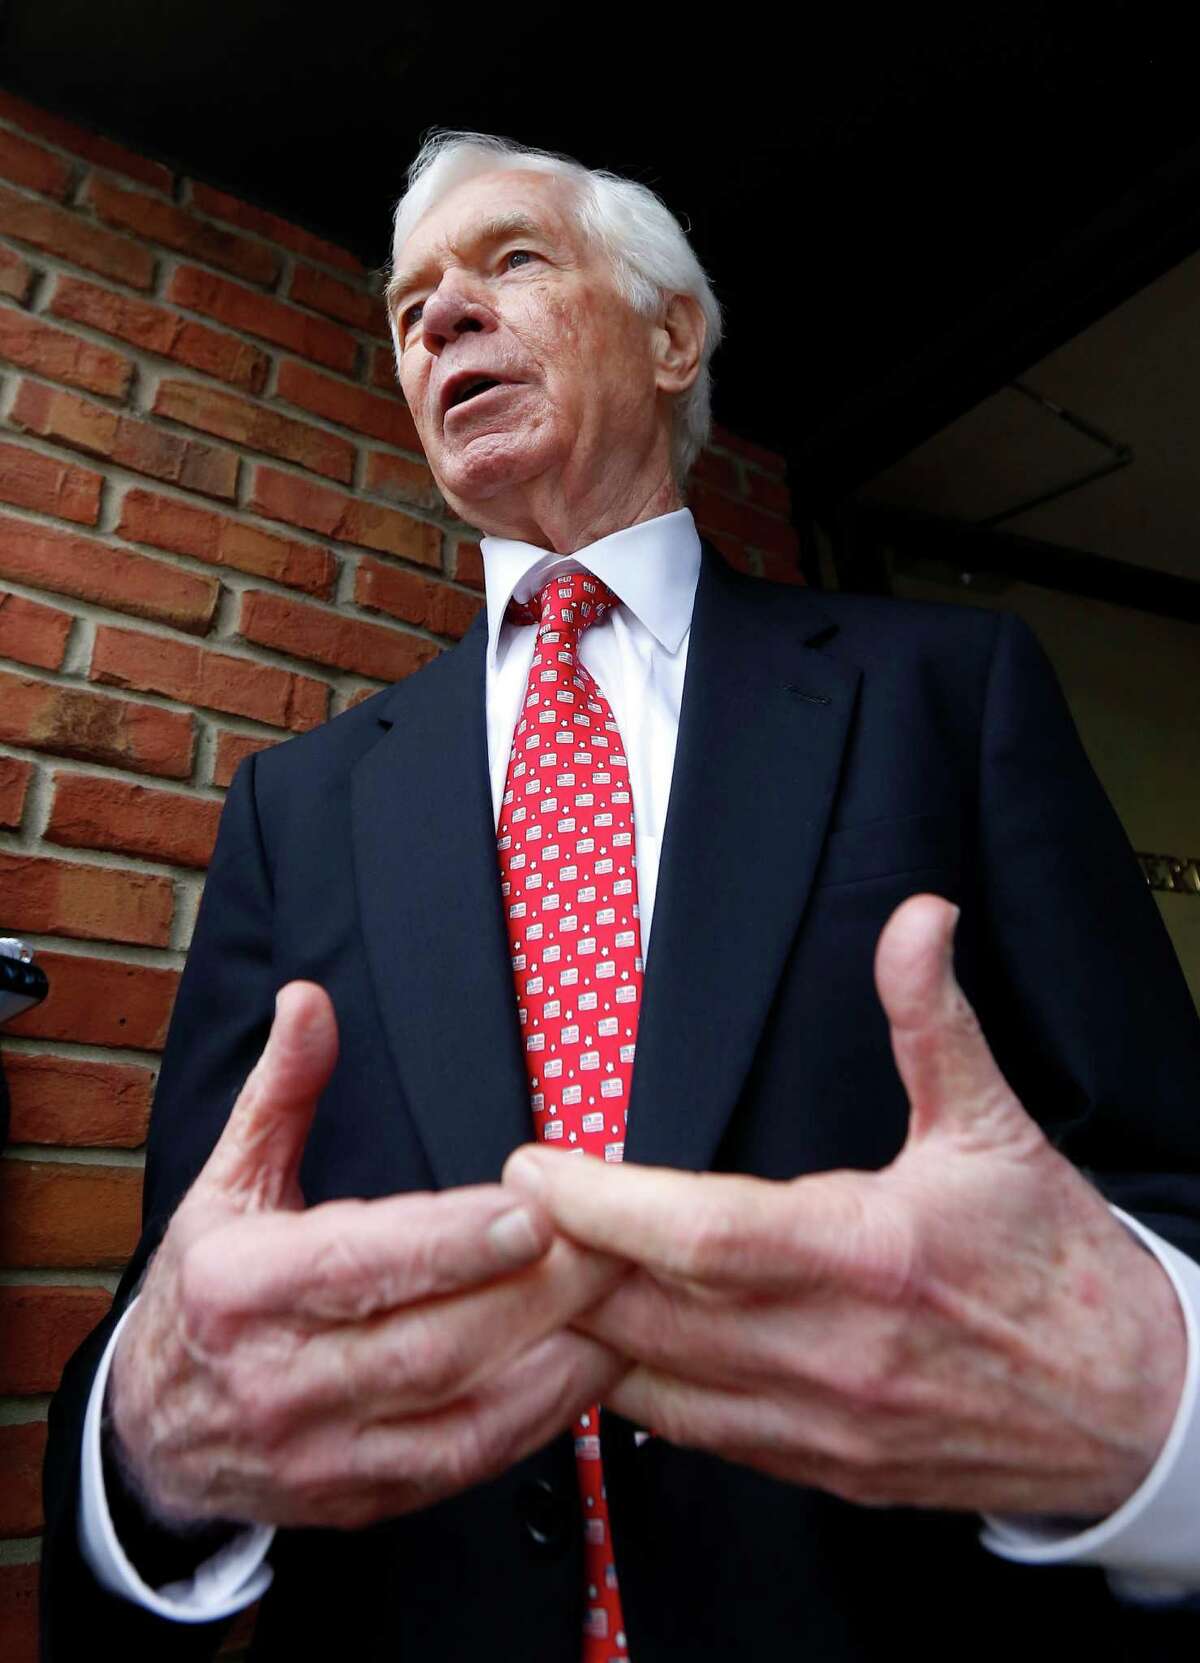 U.S. Sen. Thad Cochran, R-Miss., speaks with a reporter at his Canton, Miss., headquarters, Tuesday, June 24, 2014. Cochran is in the Republican primary runoff election against state Sen. Chris McDaniel on Tuesday. (AP Photo/Rogelio V. Solis) ORG XMIT: MSRS110